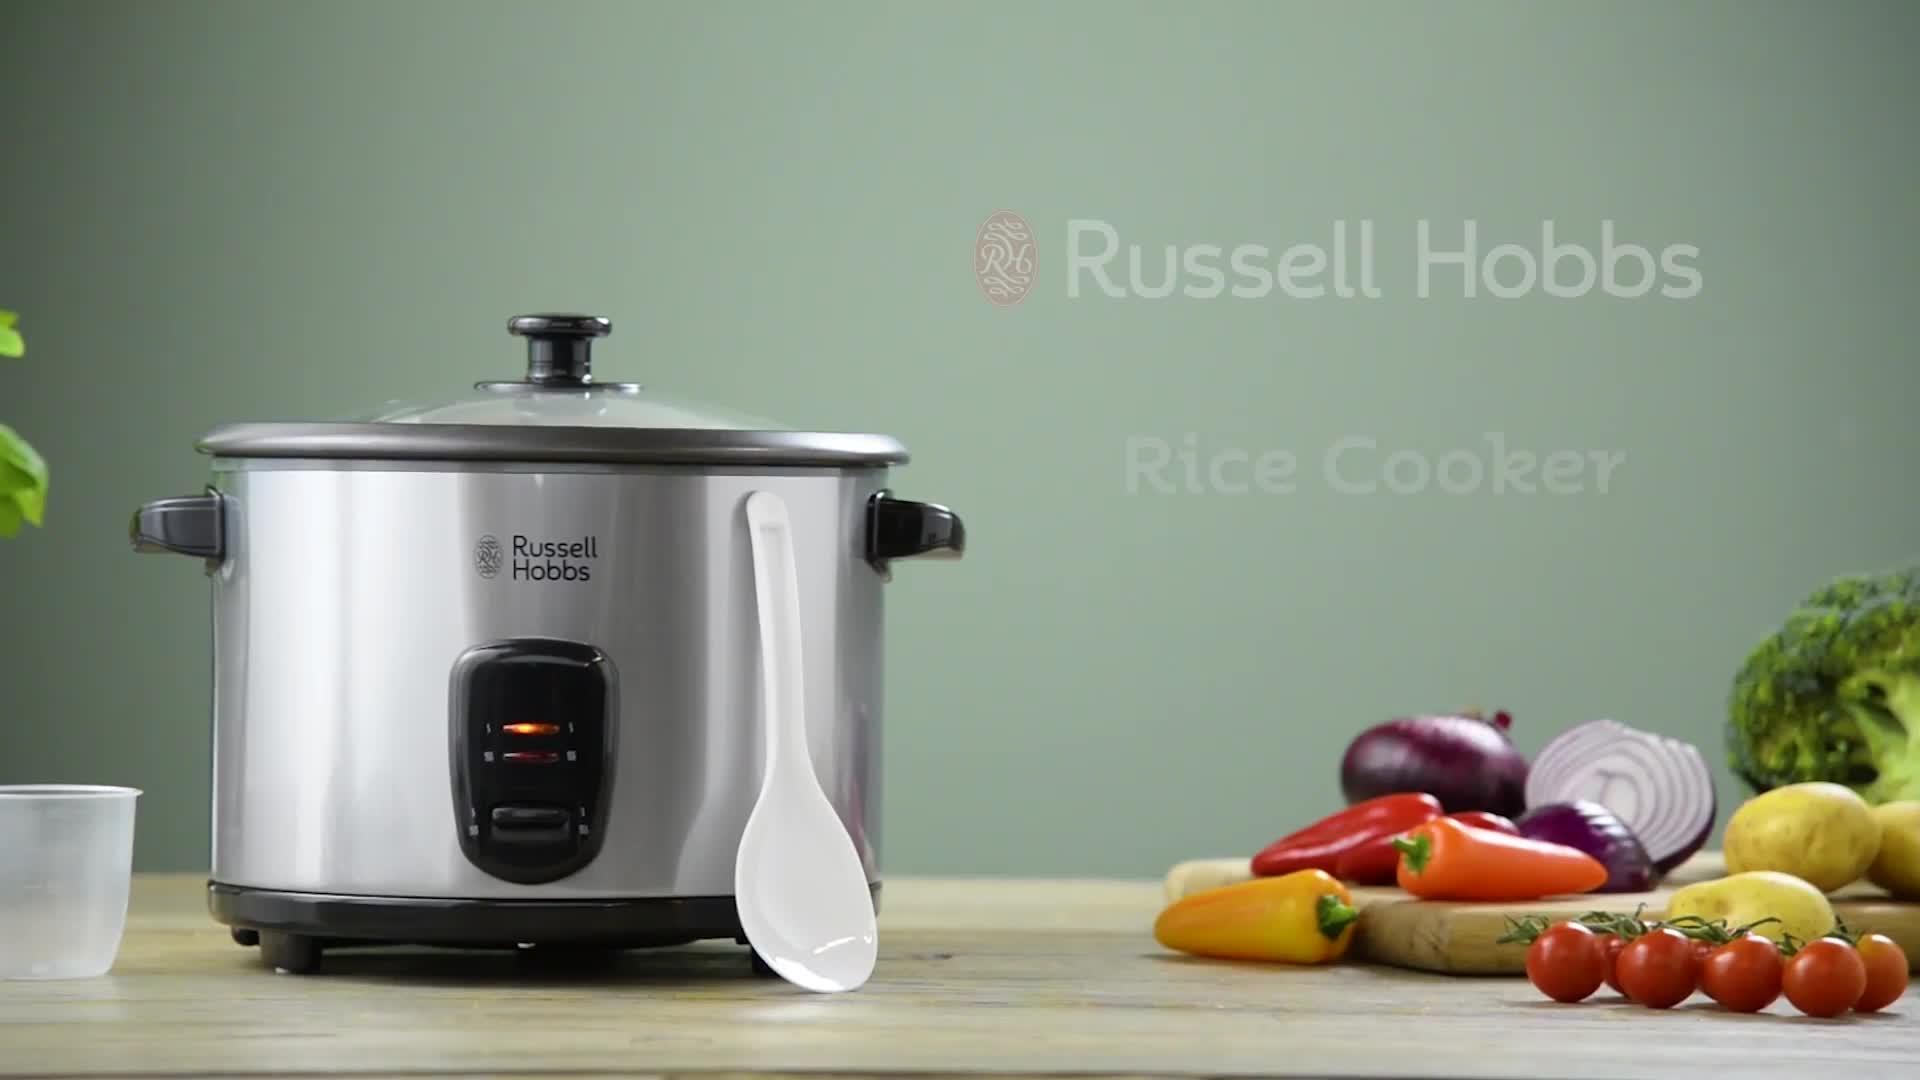 Russell Hobbs 19750 Rice Cooker and Steamer - 6078N